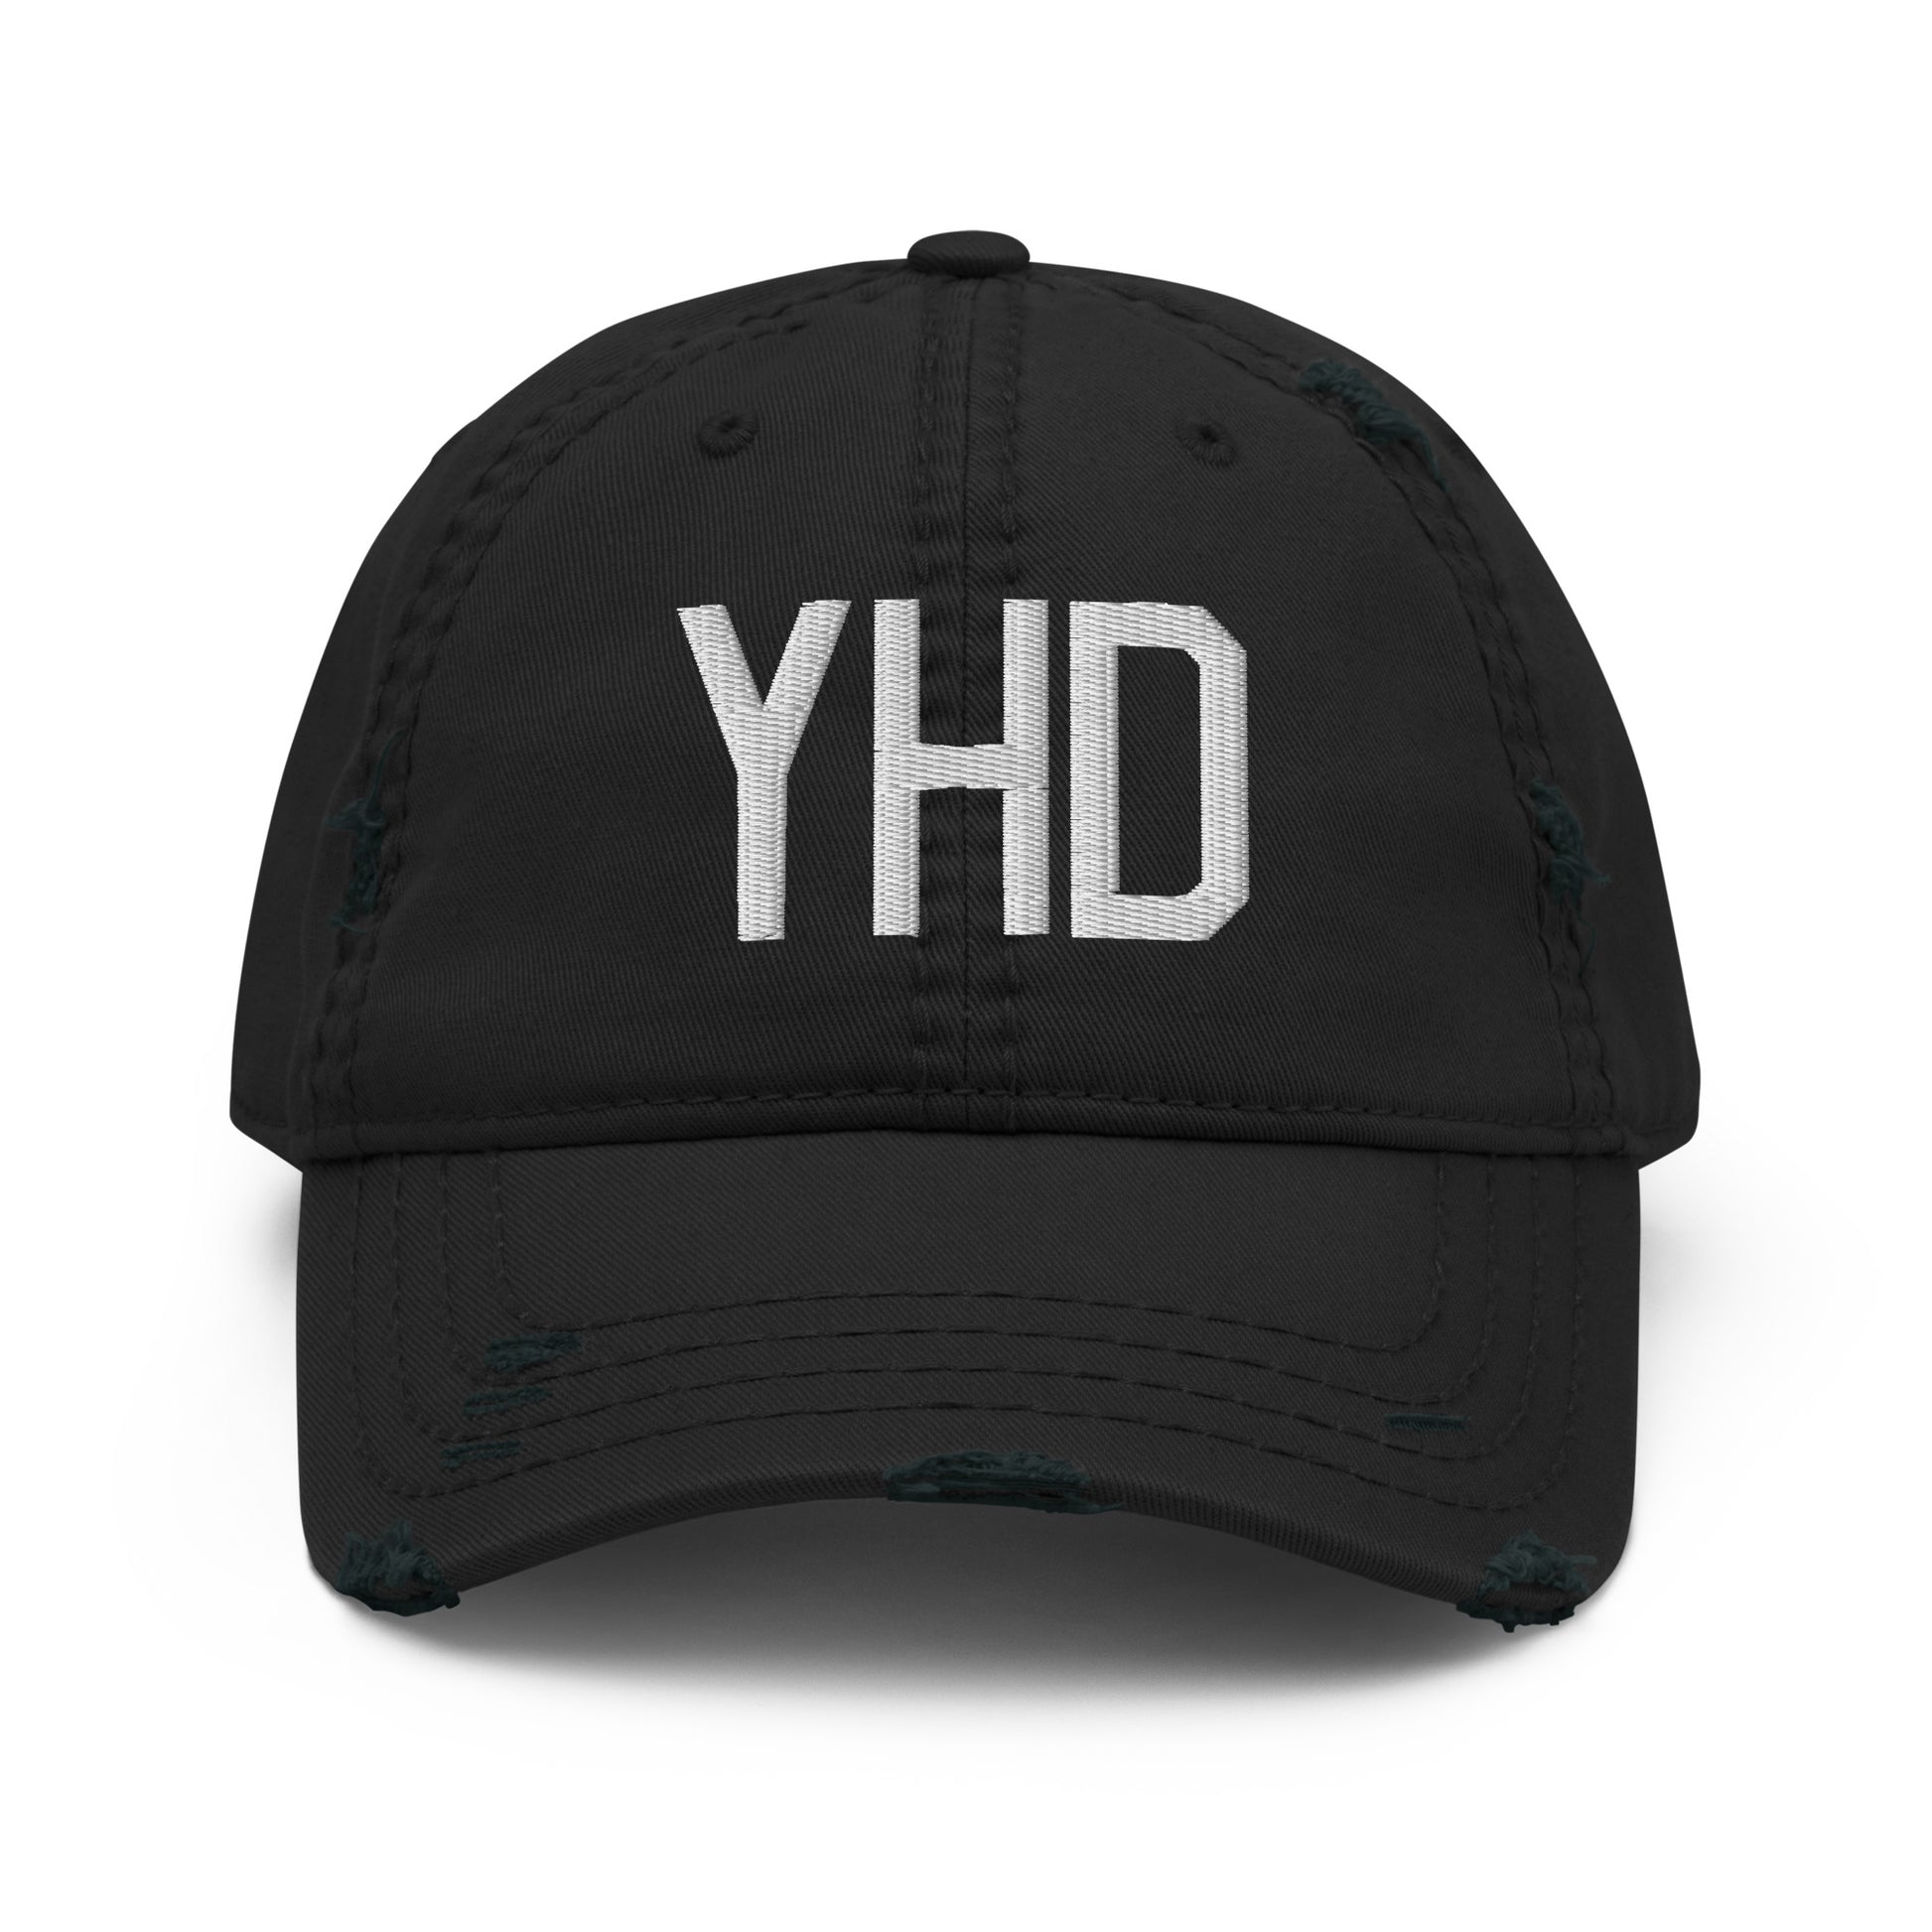 Airport Code Distressed Hat - White • YHD Dryden • YHM Designs - Image 10